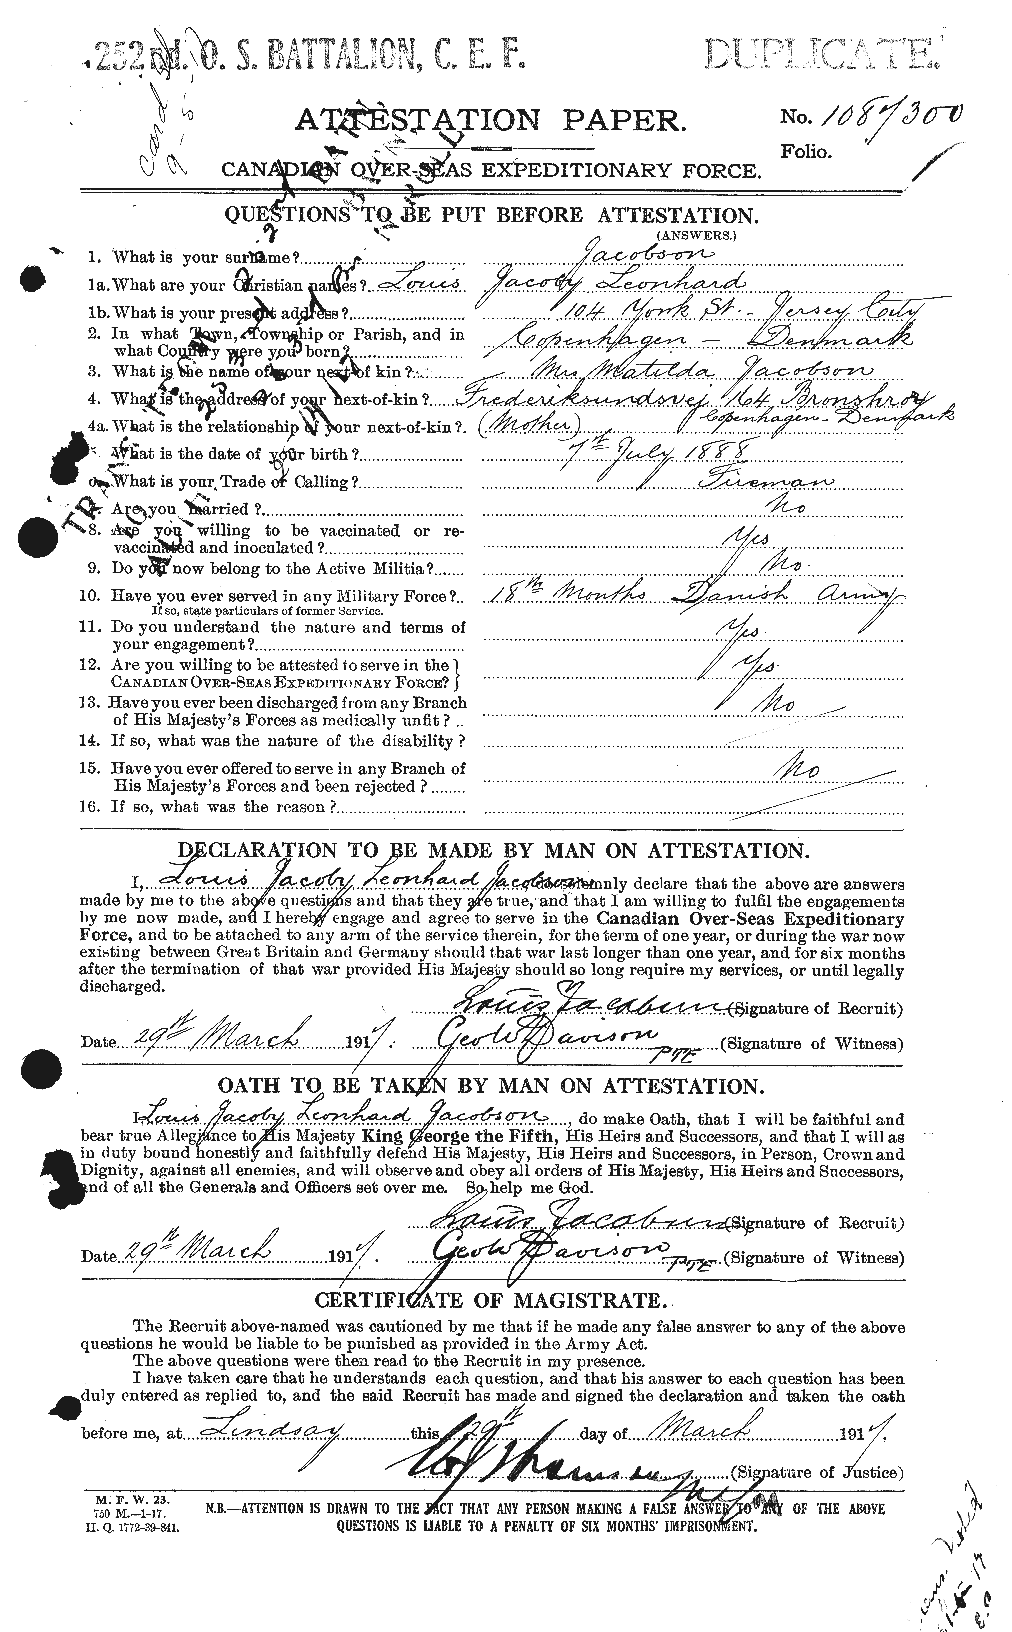 Personnel Records of the First World War - CEF 414285a